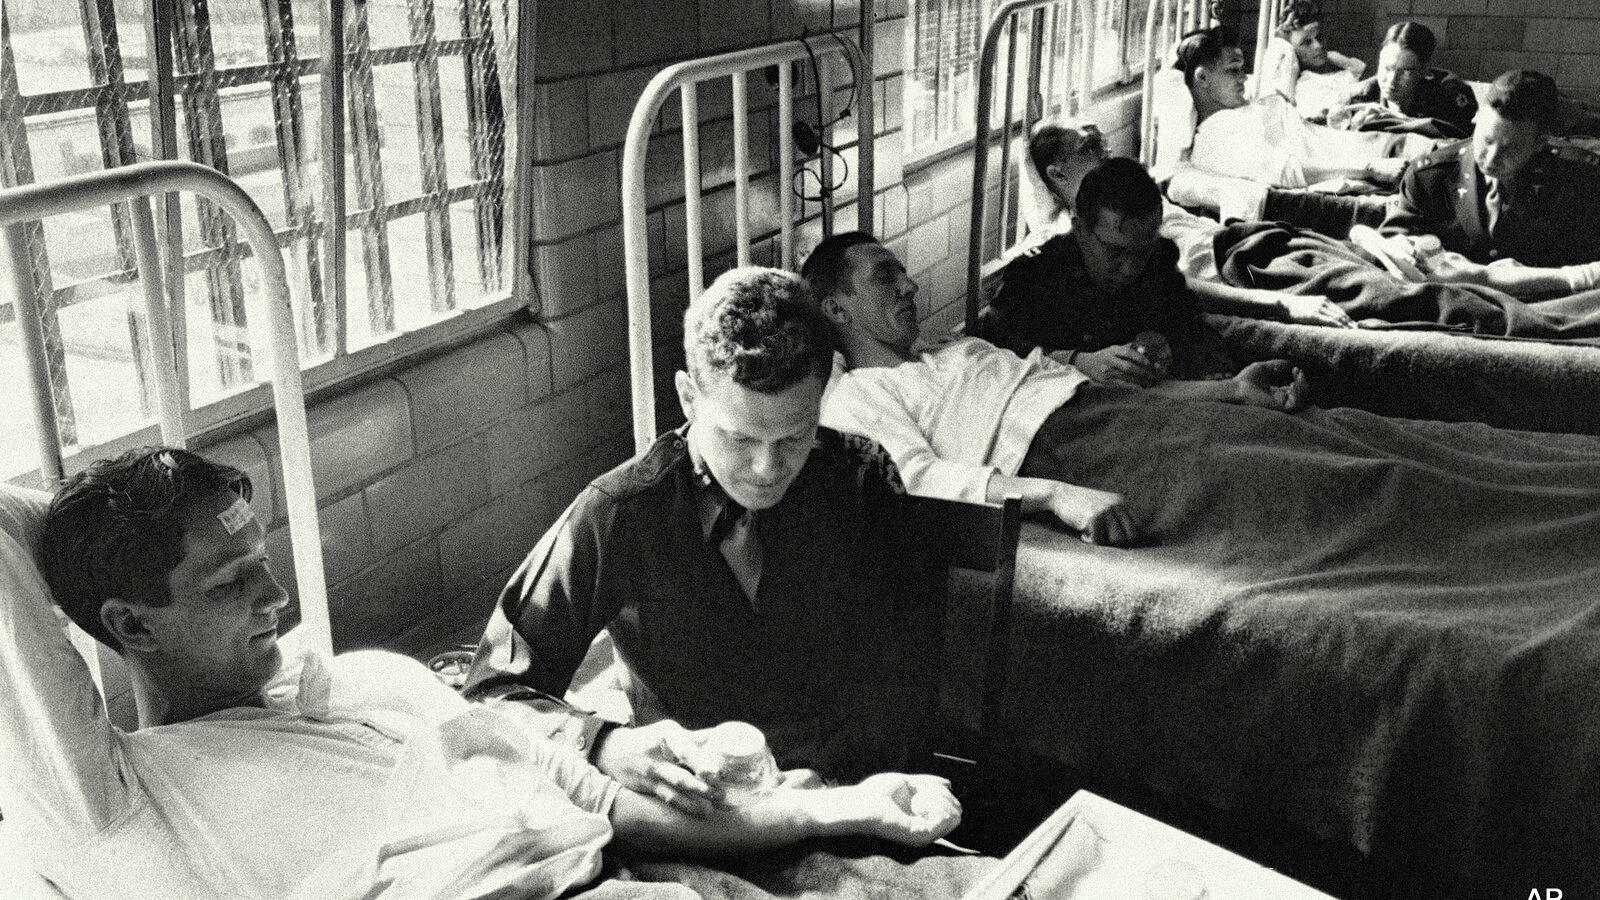 FILE - In this June 25, 1945 picture, army doctors expose patients to malaria-carrying mosquitoes in the malaria ward at Stateville Penitentiary in Crest Hill, Ill.